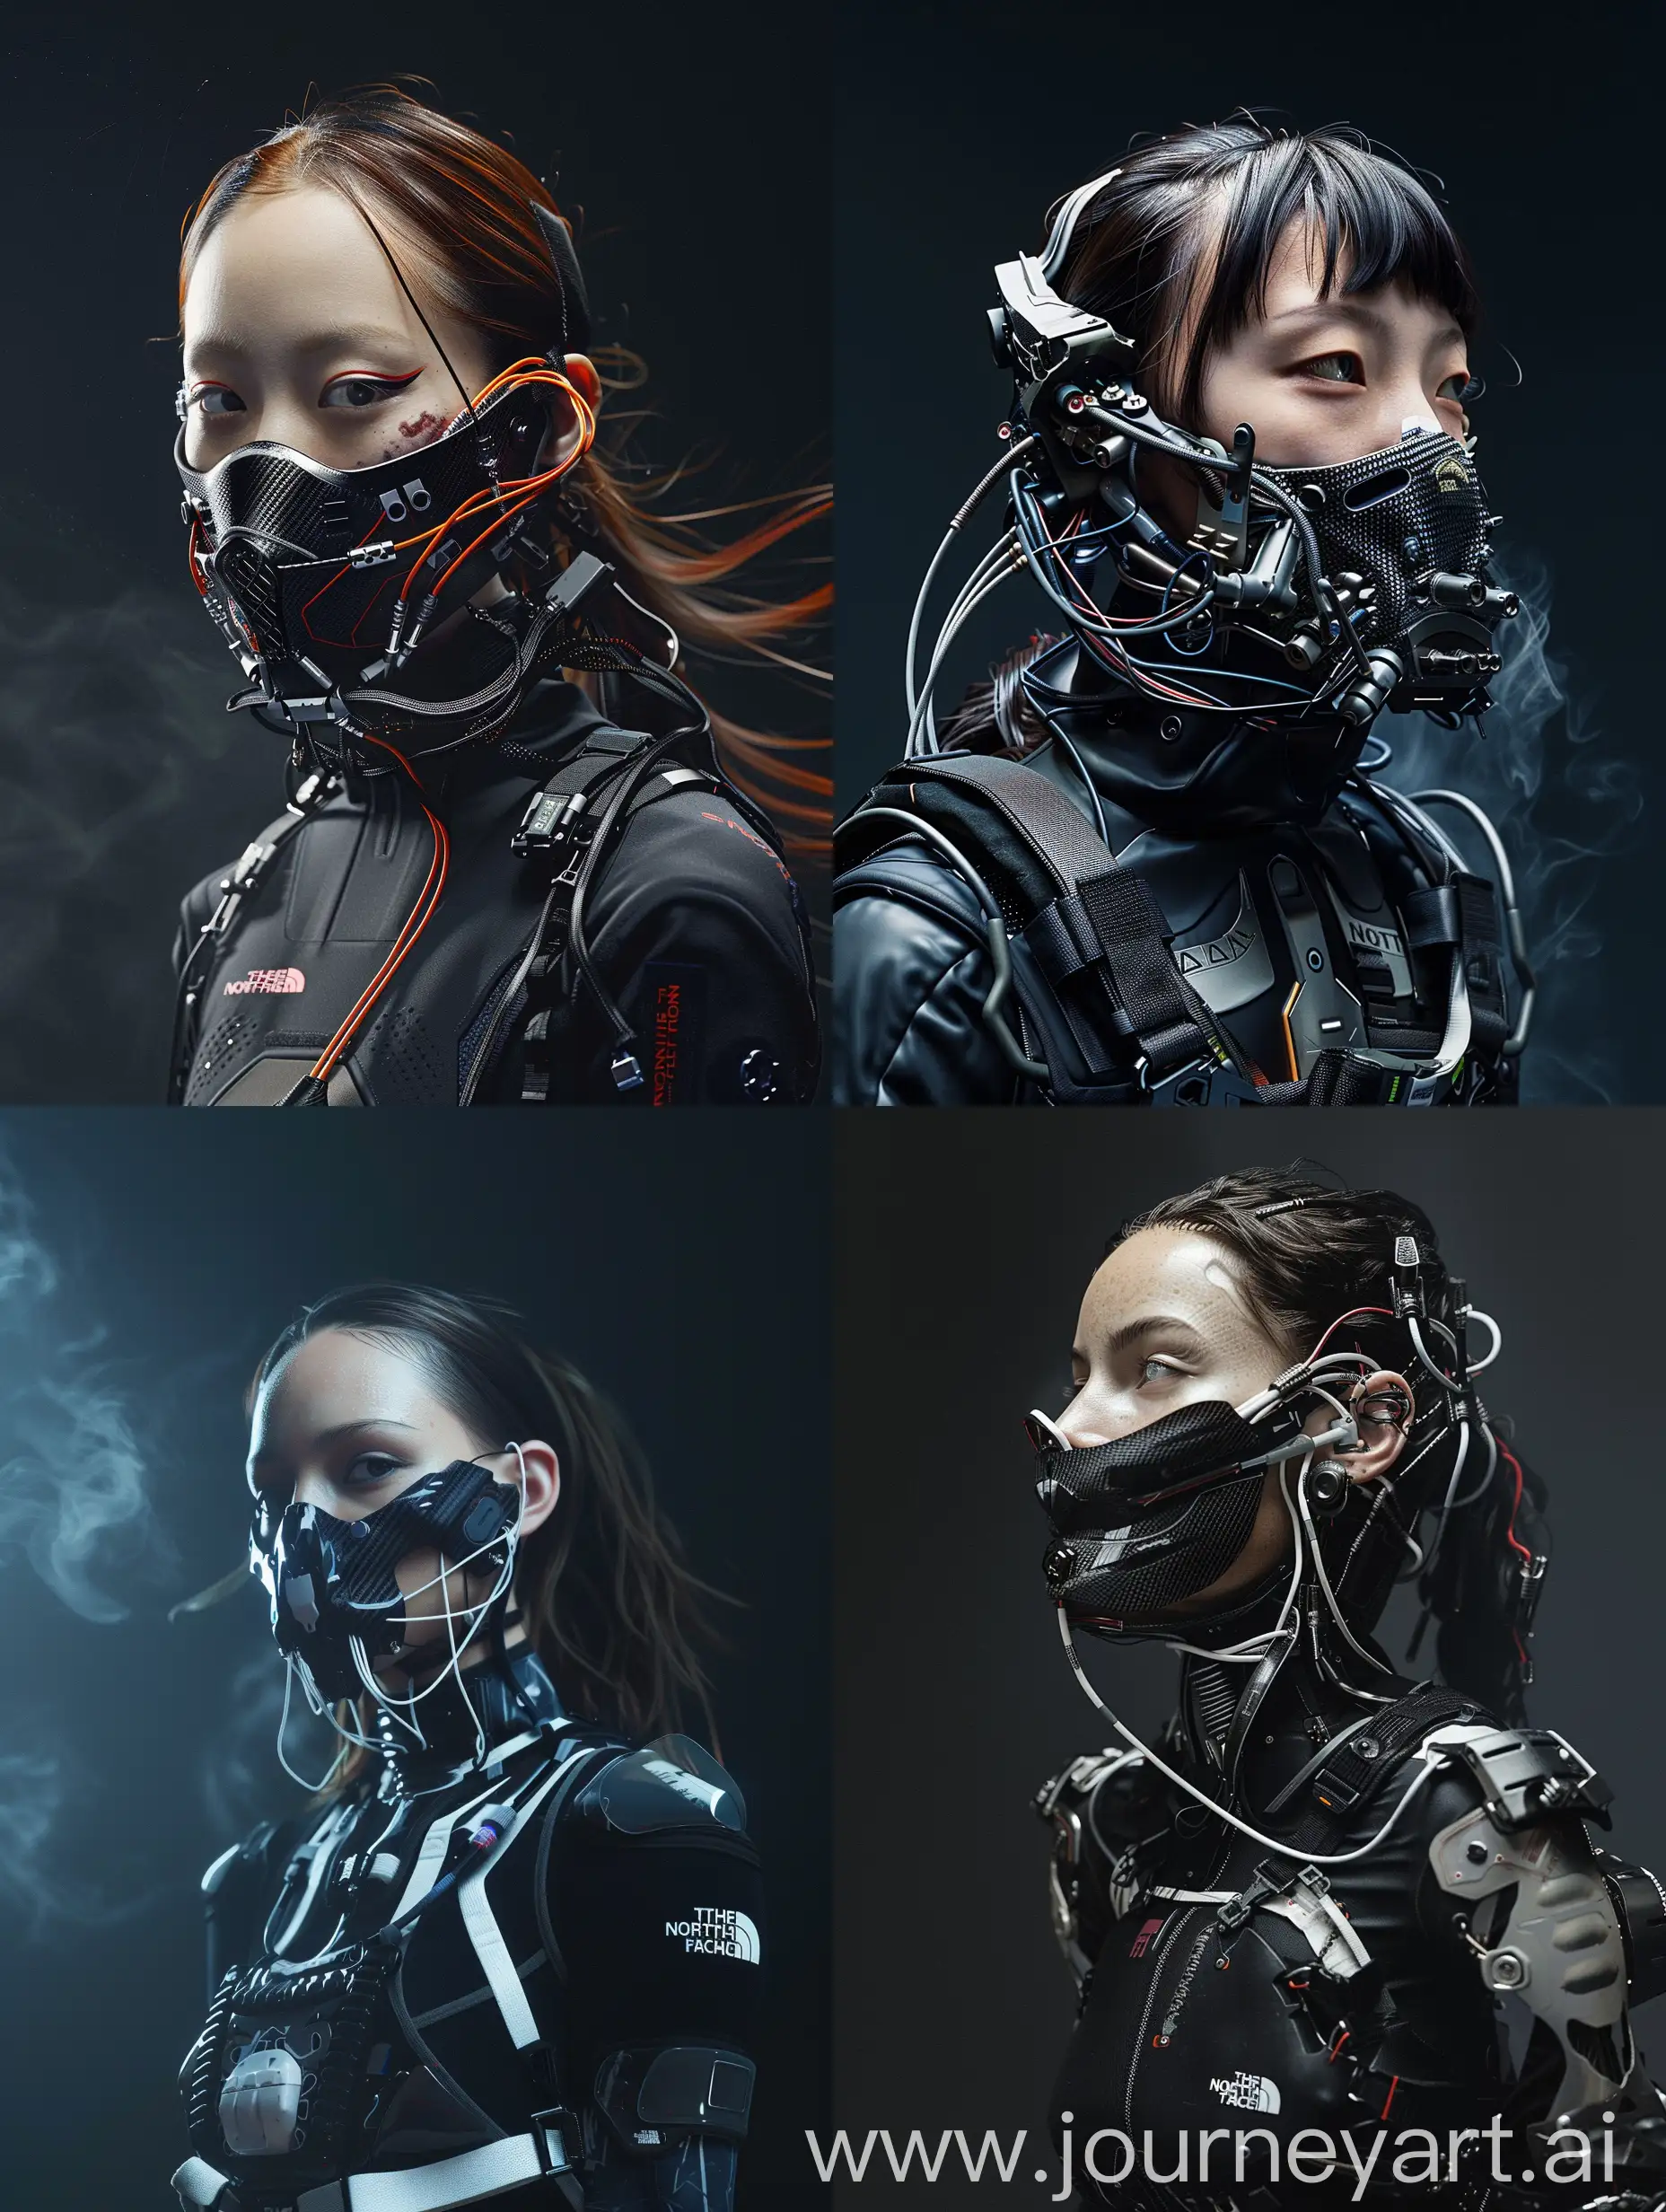 Futuristic-Cyberpunk-Woman-with-Cybernetic-Mask-and-North-FaceInspired-Addons